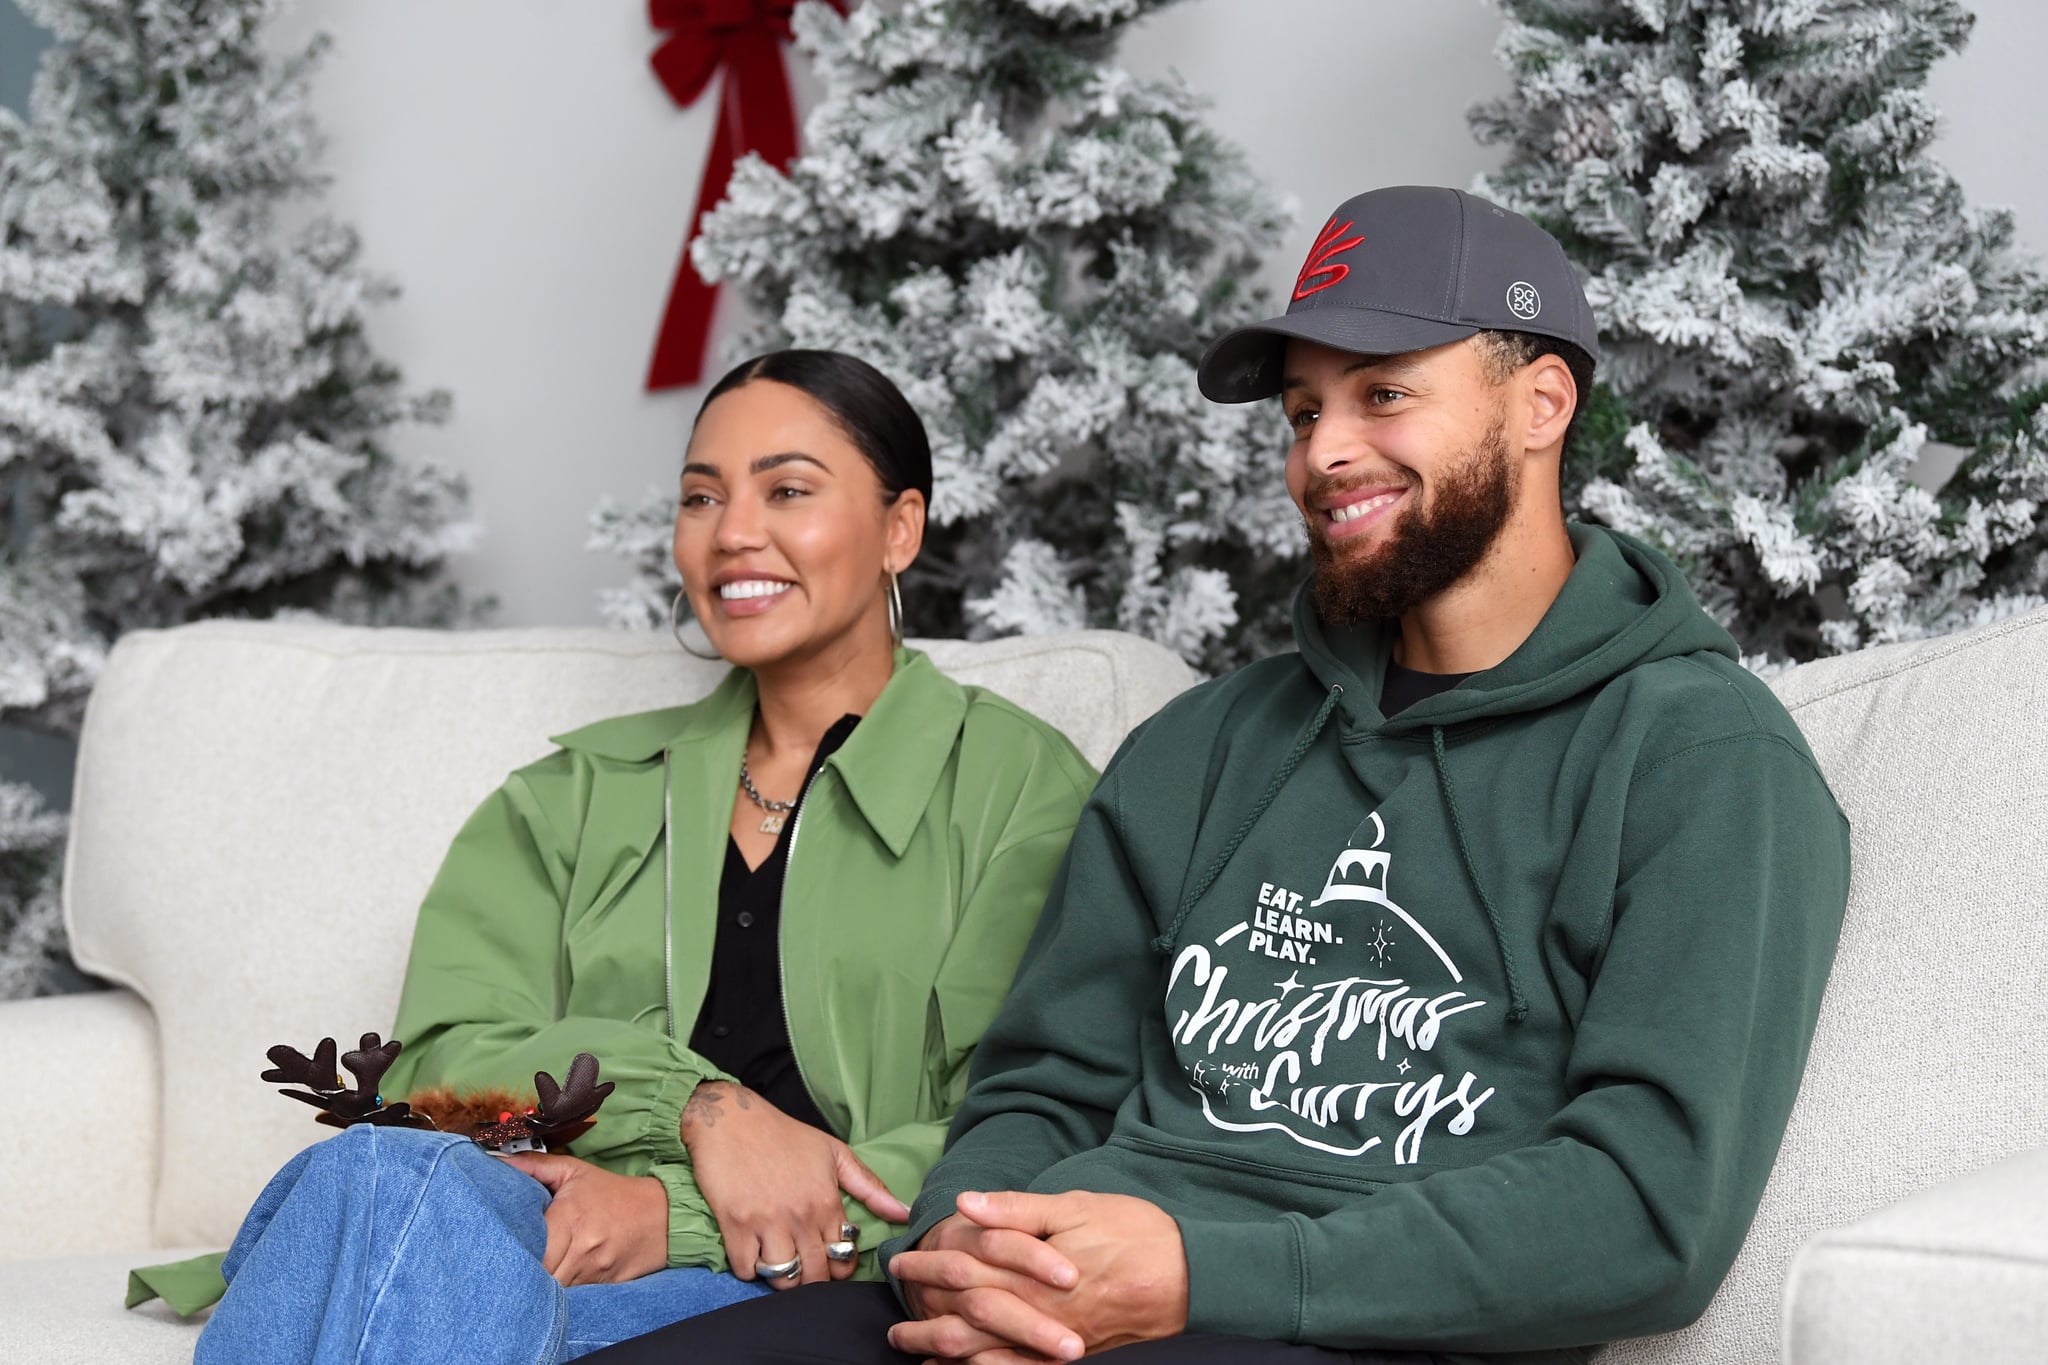 OAKLAND, CALIFORNIA - DECEMBER 11: (L-R) Ayesha Curry and Stephen Curry attend Eat. Learn. Play.'s 10th Annual Christmas with the Currys Celebration at The Bridge Yard on December 11, 2022 in Oakland, California. (Photo by Noah Graham/Getty Images for Eat. Learn. Play.)